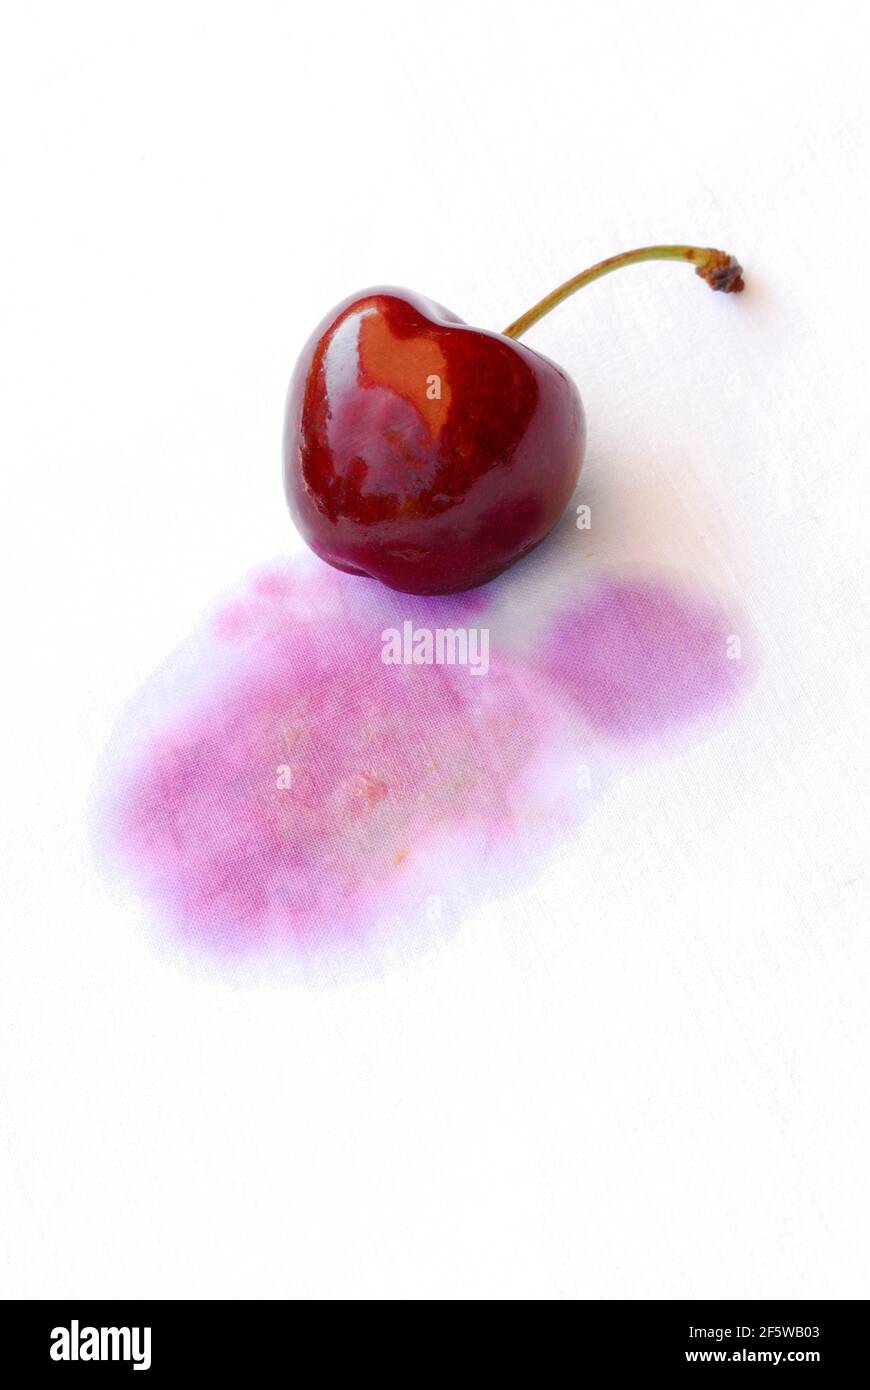 Stain, stains, cherry stain on fabric, cherry stain, cherry, cherry Stock Photo